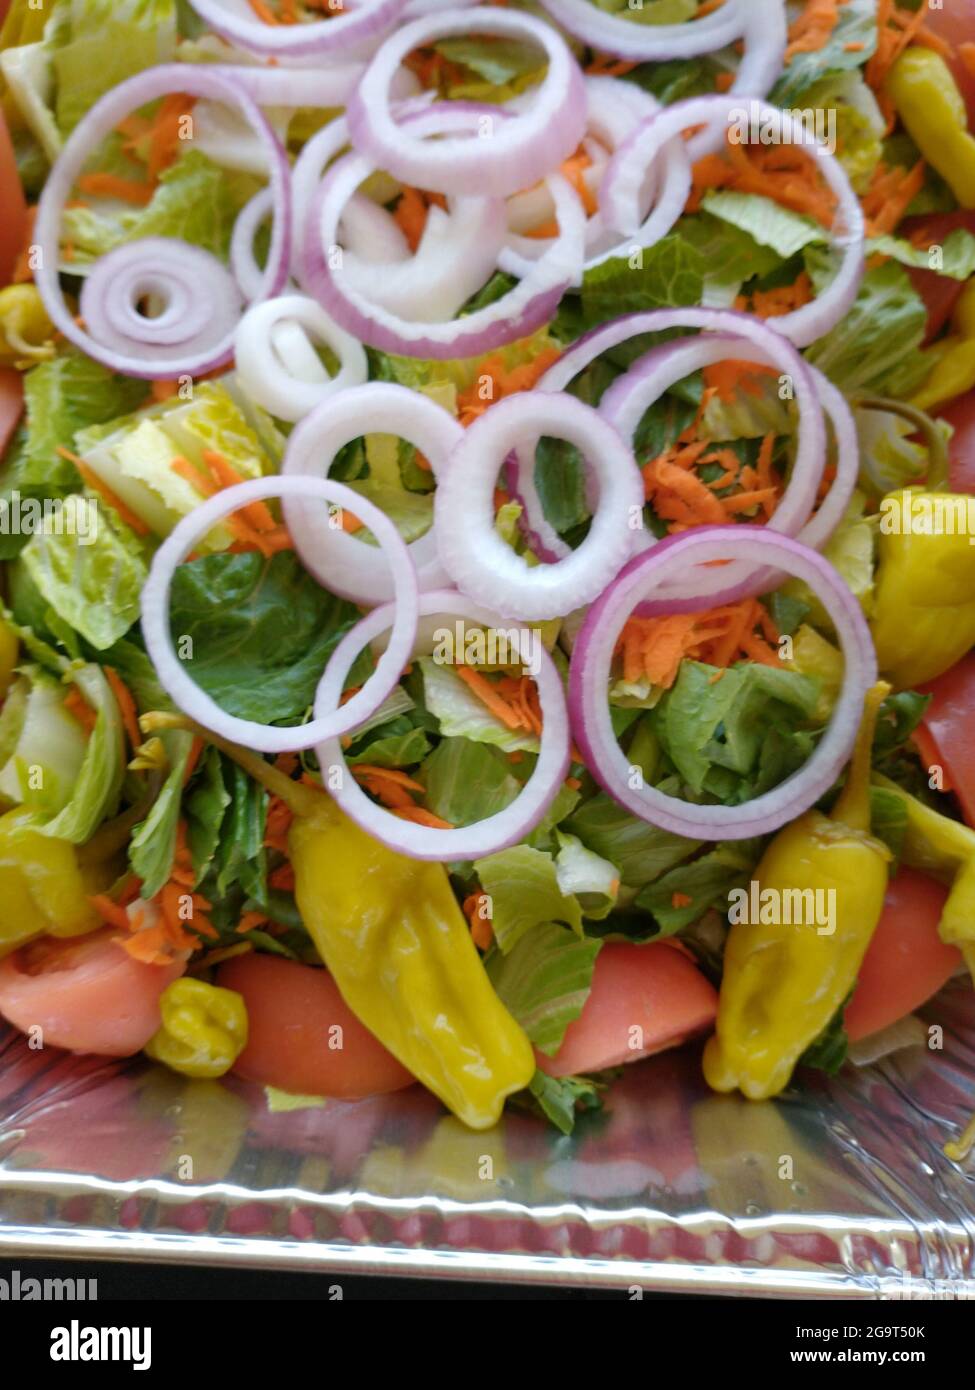 Mixed Sald with Onions Stock Photo